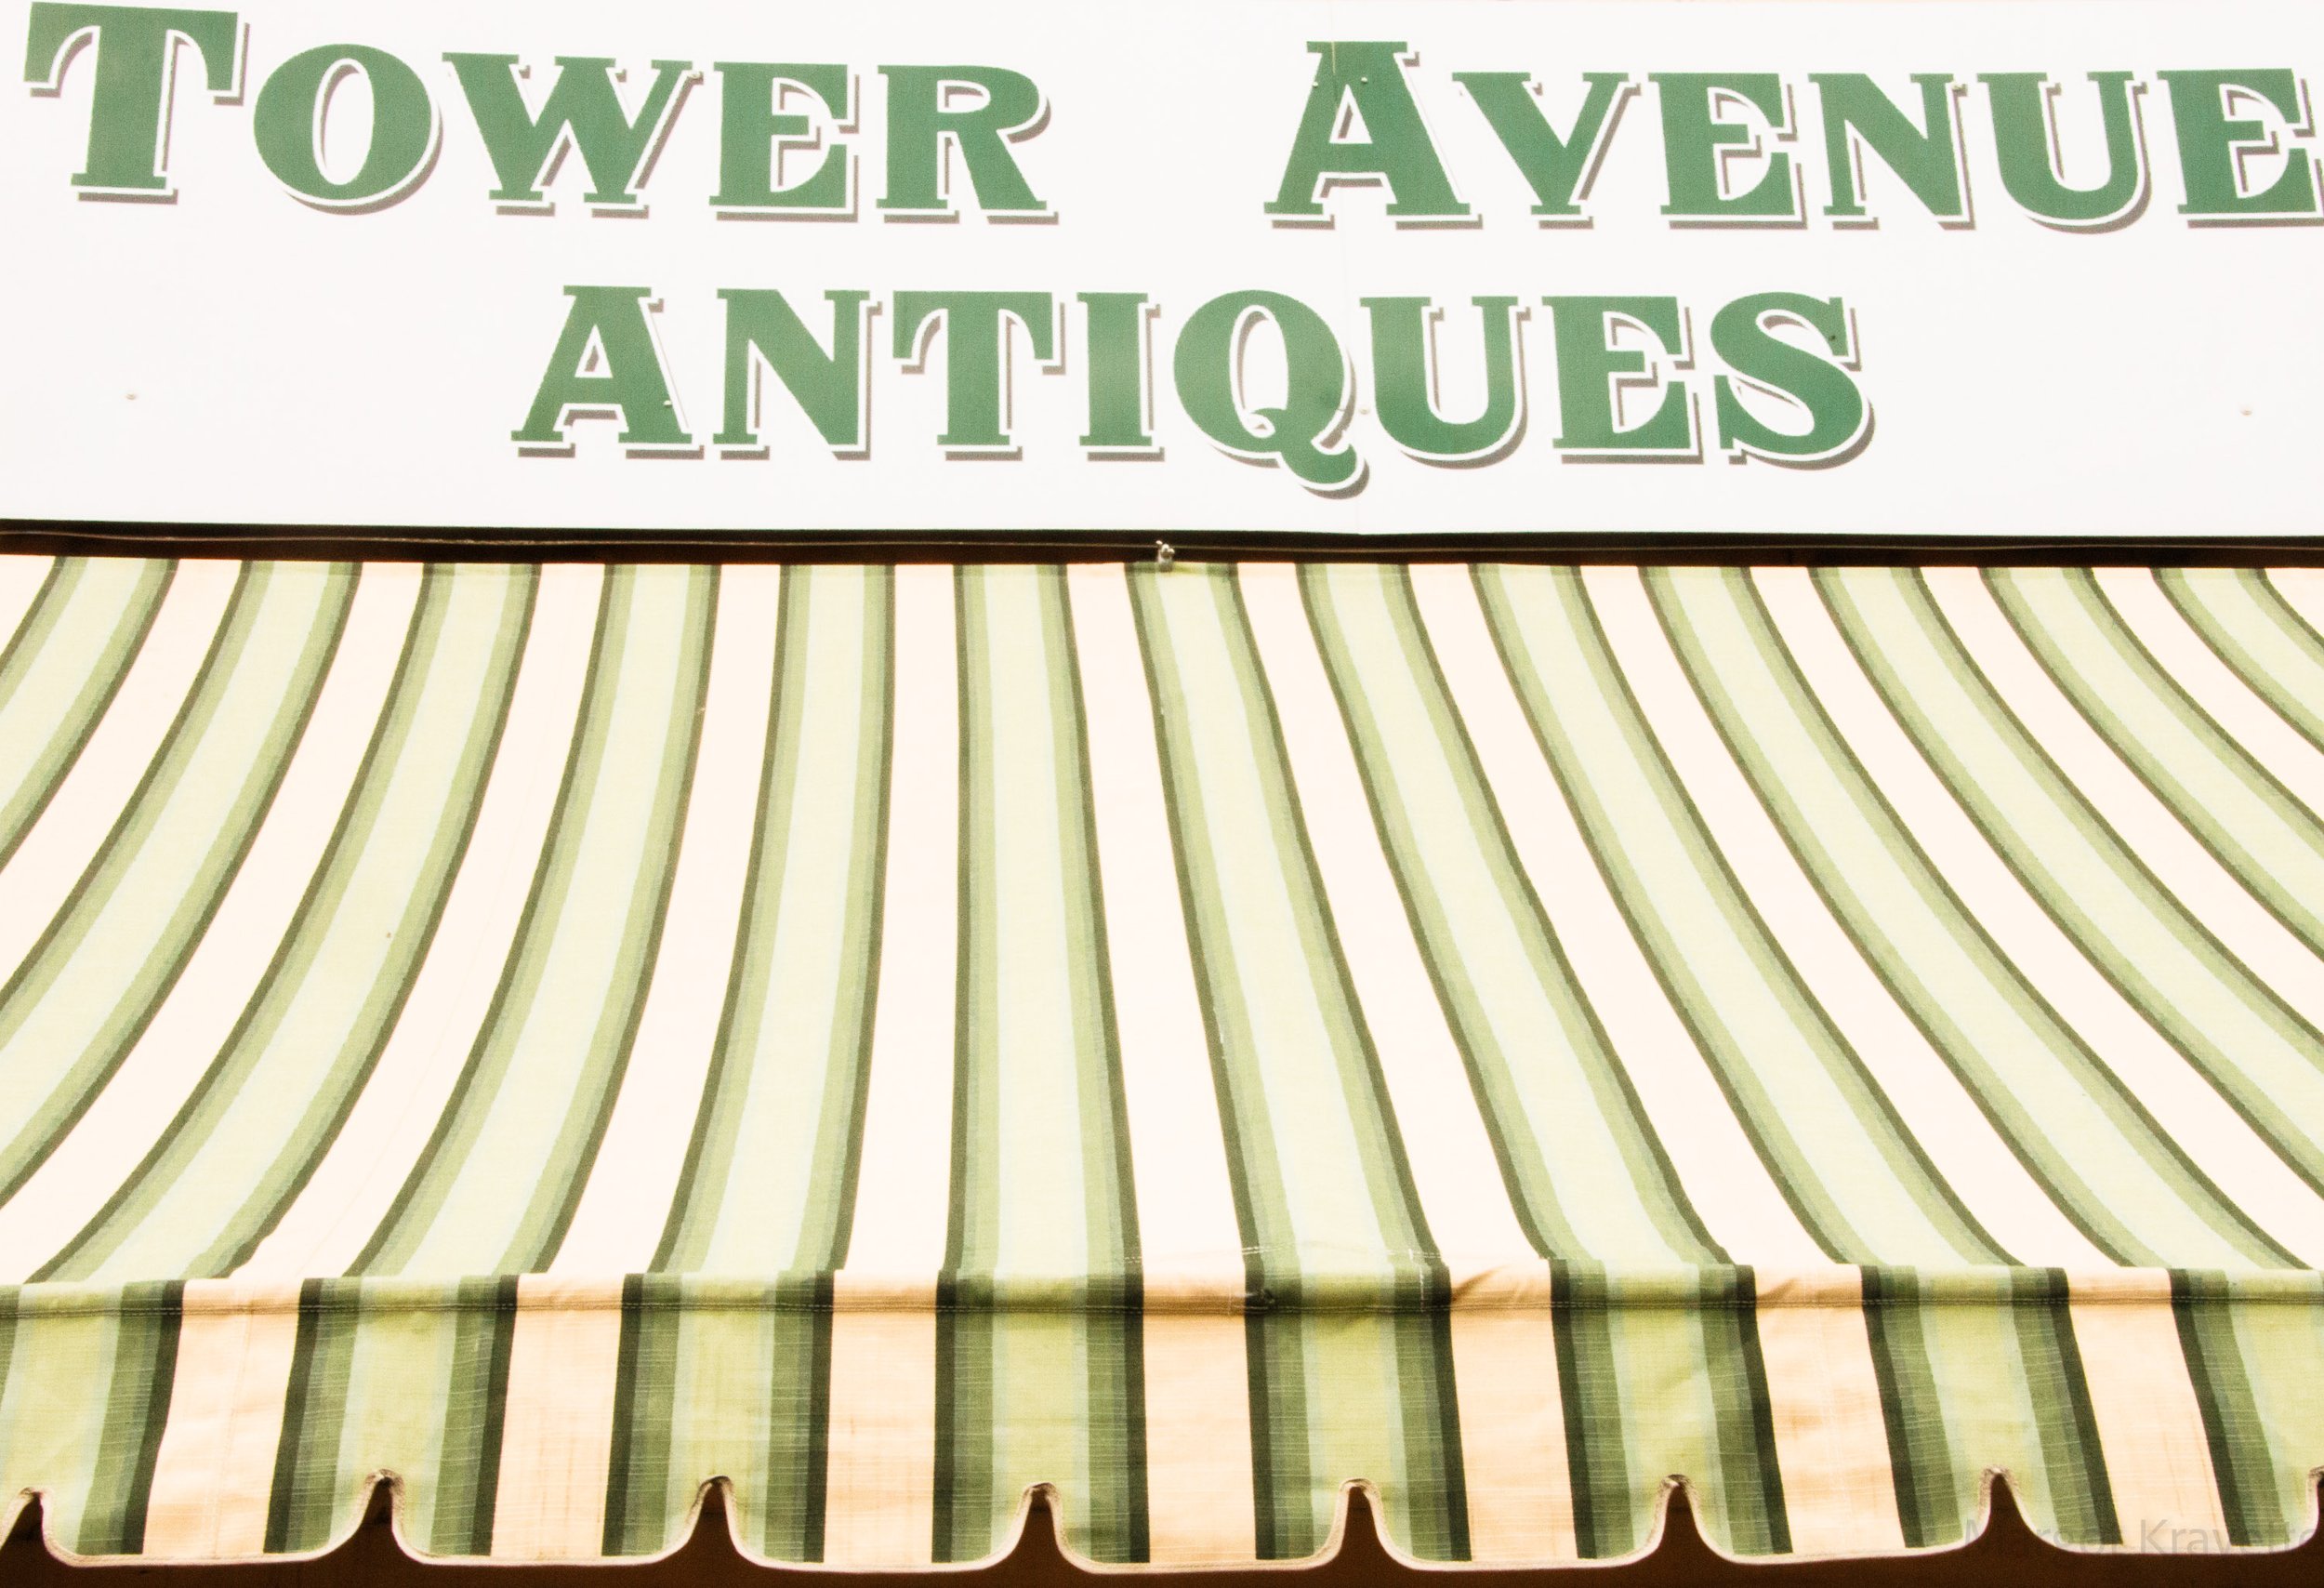 Antiques - Tower Antiques-4032.jpg